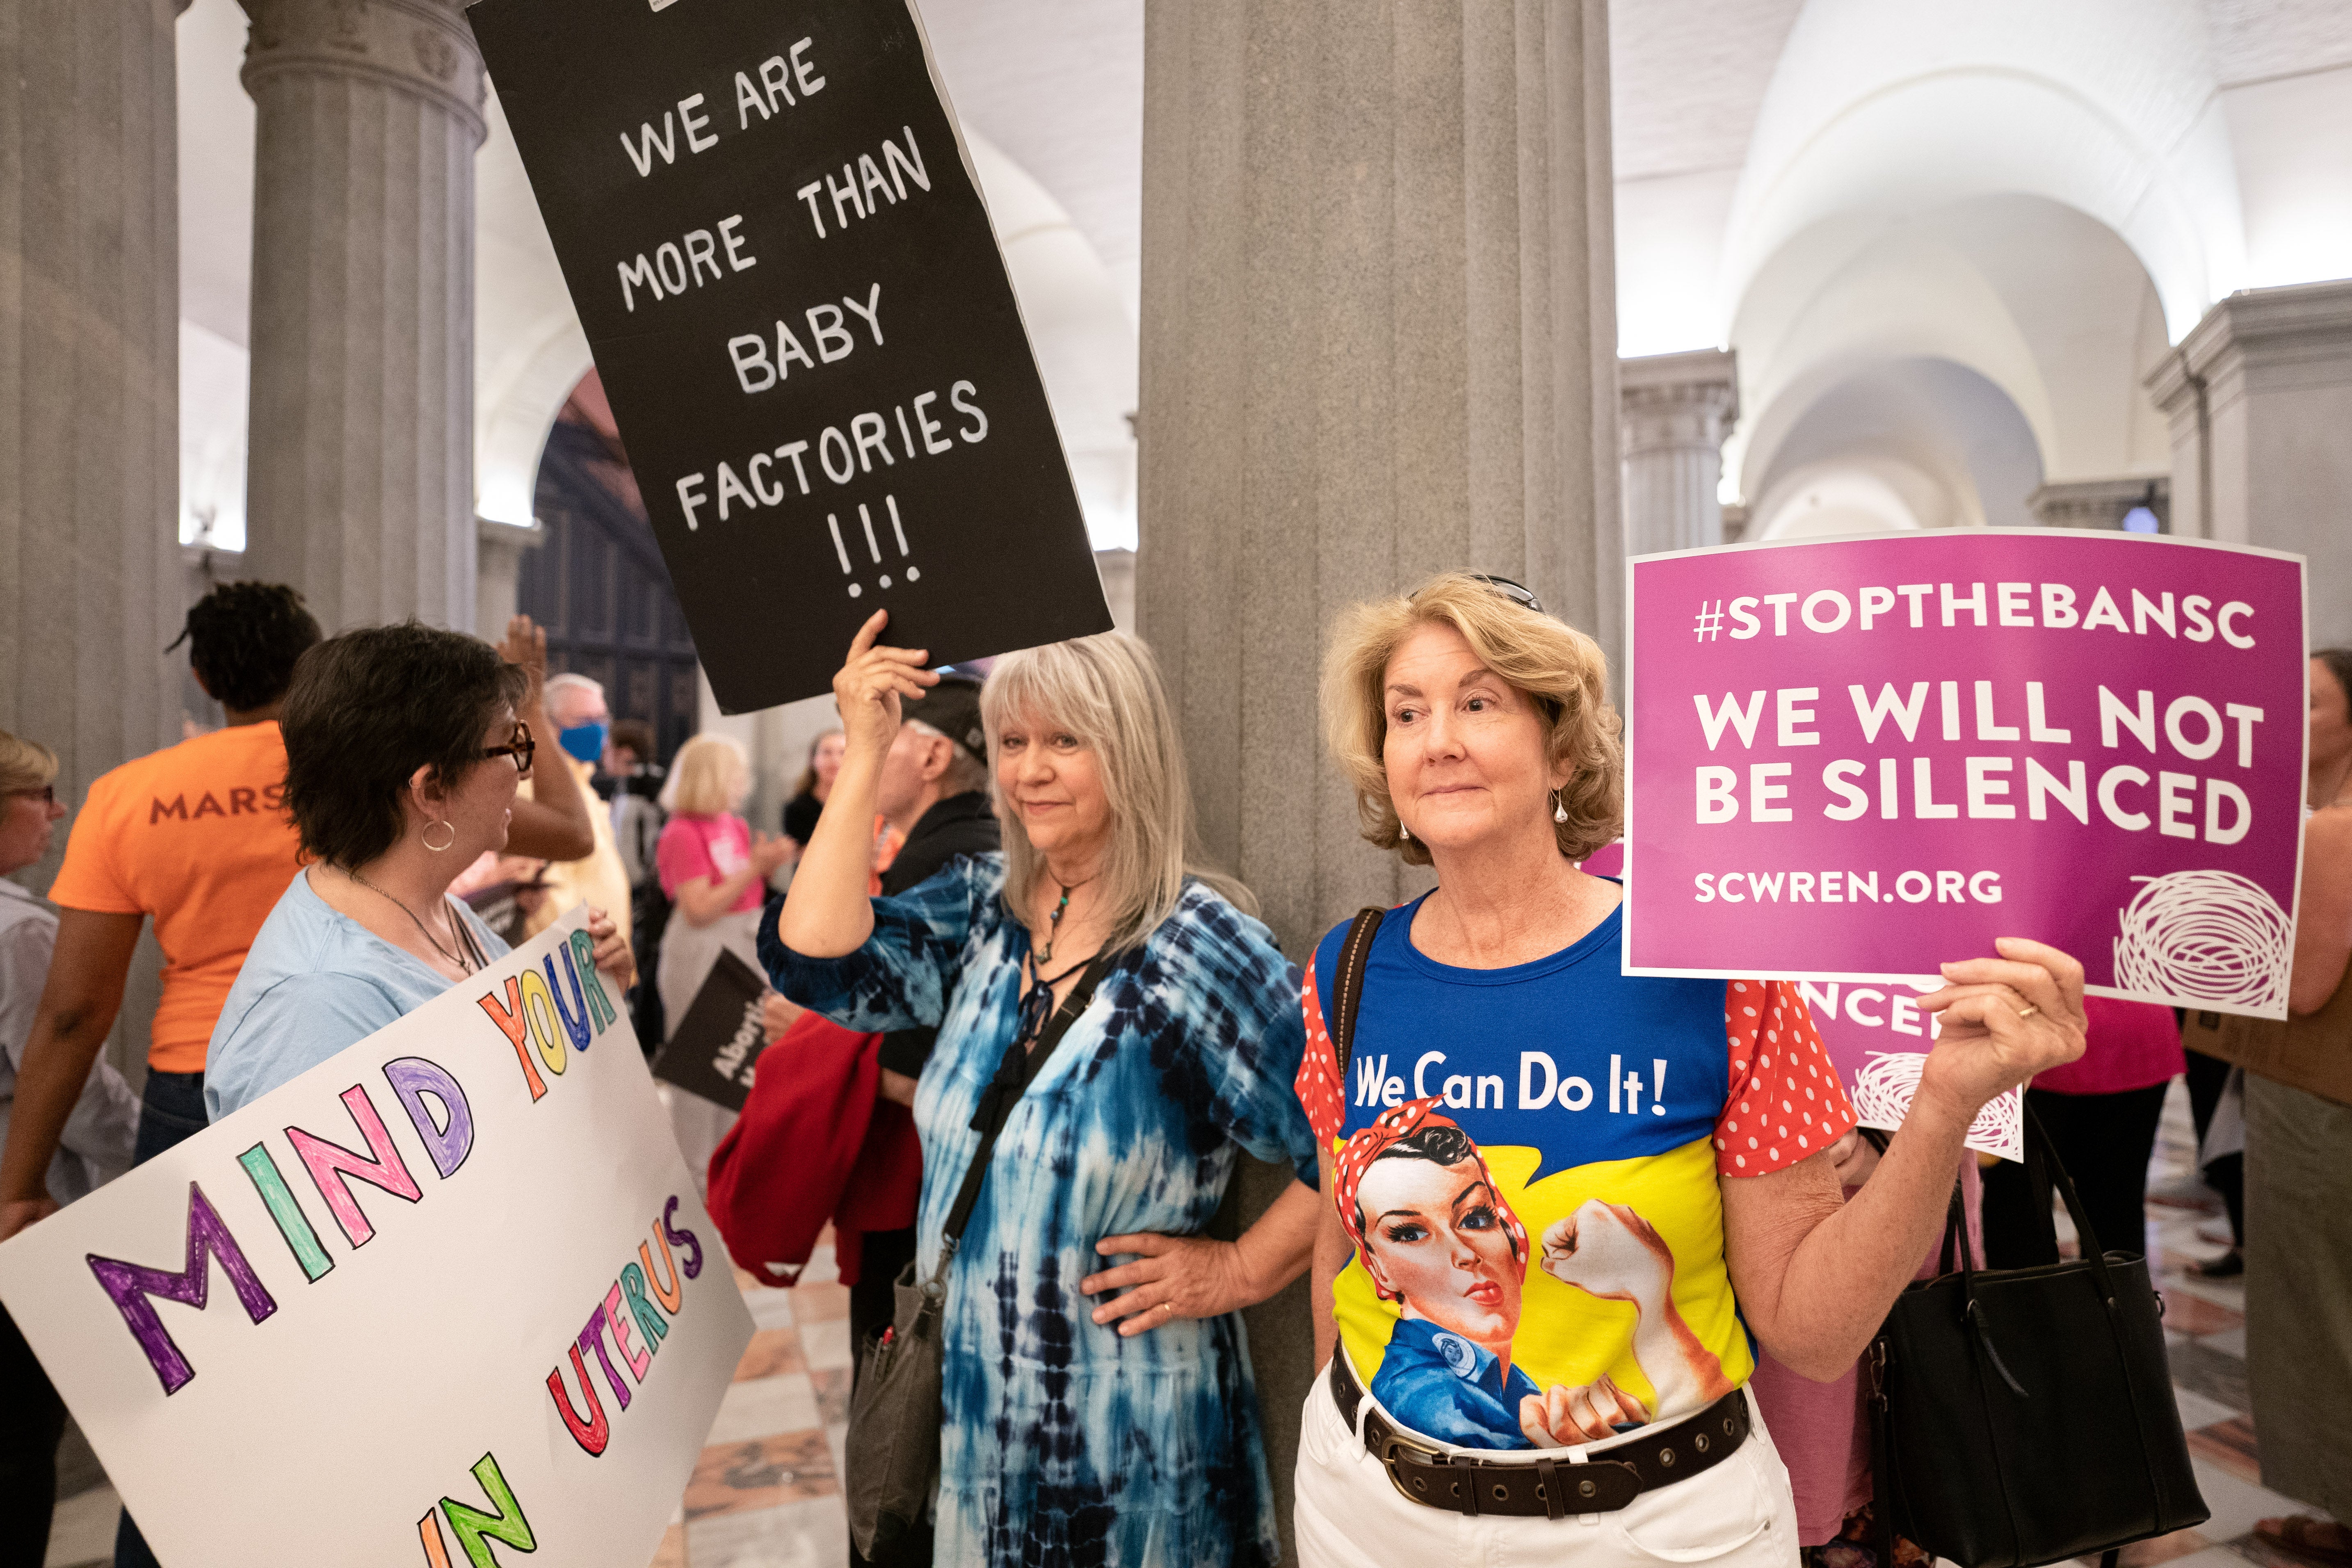 In May, abortion rights demonstrators protested inside South Carolina’s capitol as lawmakers passed a six-week abortion ban later struck down in court.